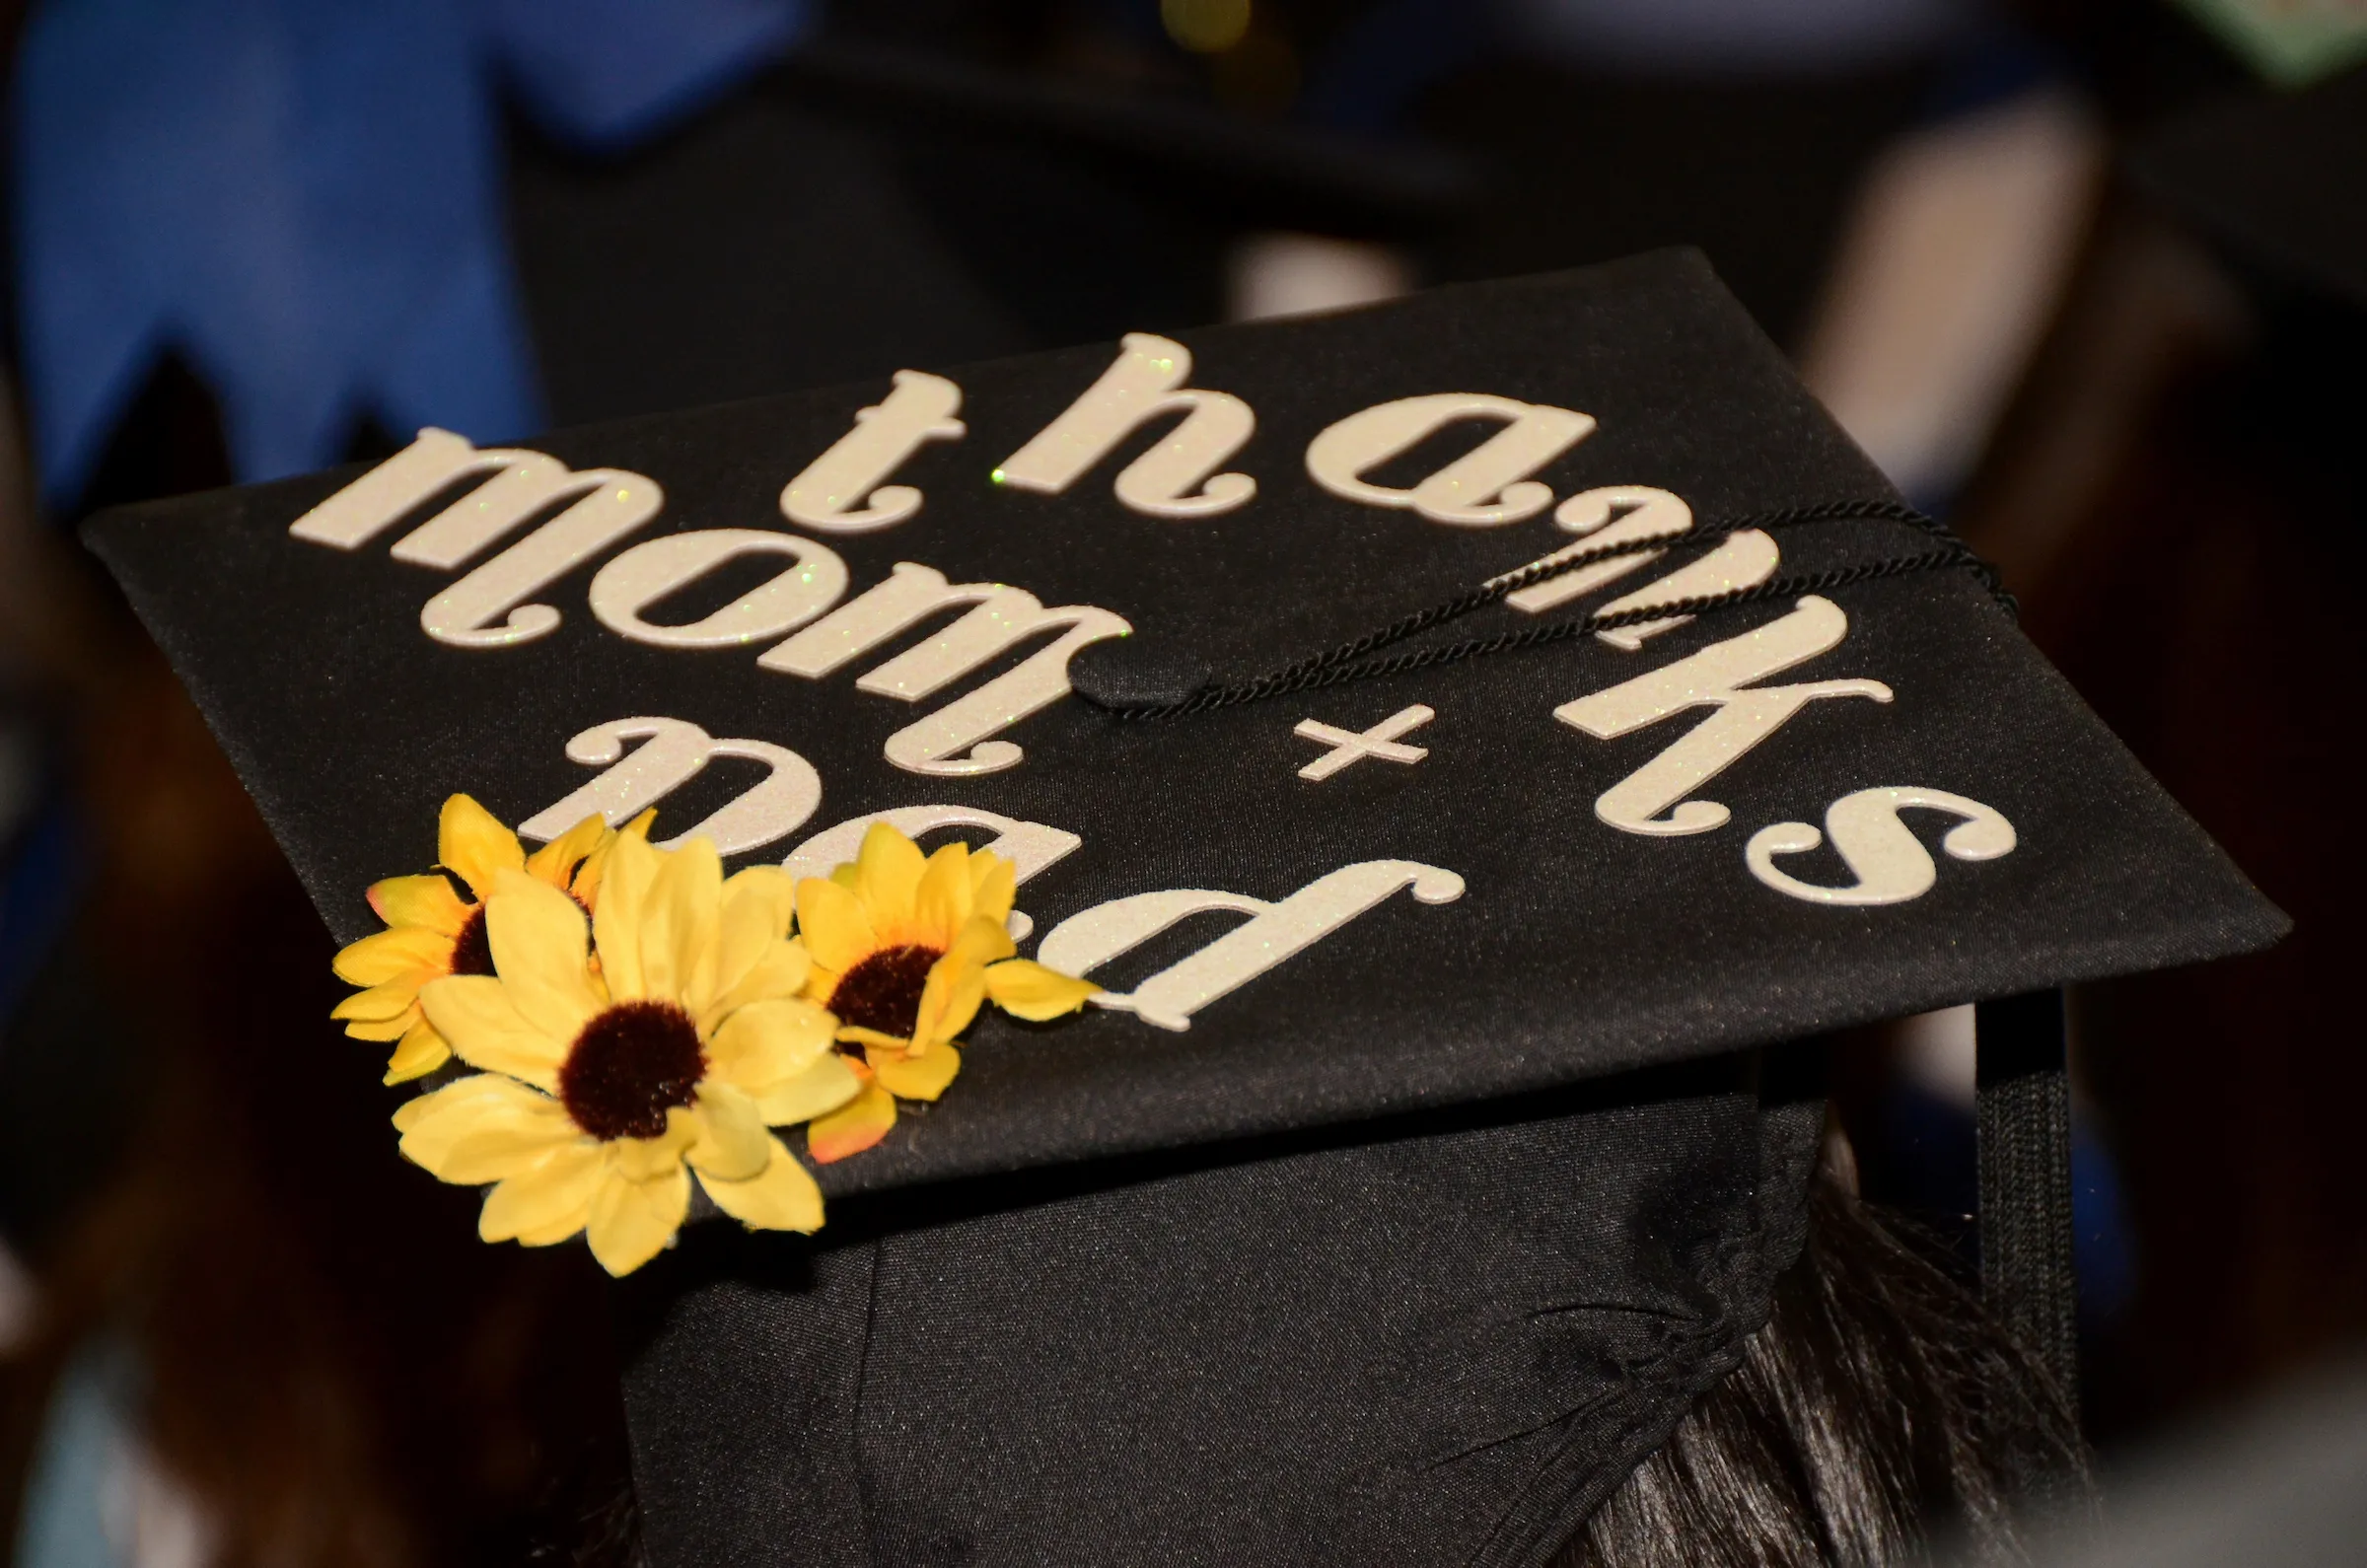 Decorated grad cap that says, "thanks mom and dad"